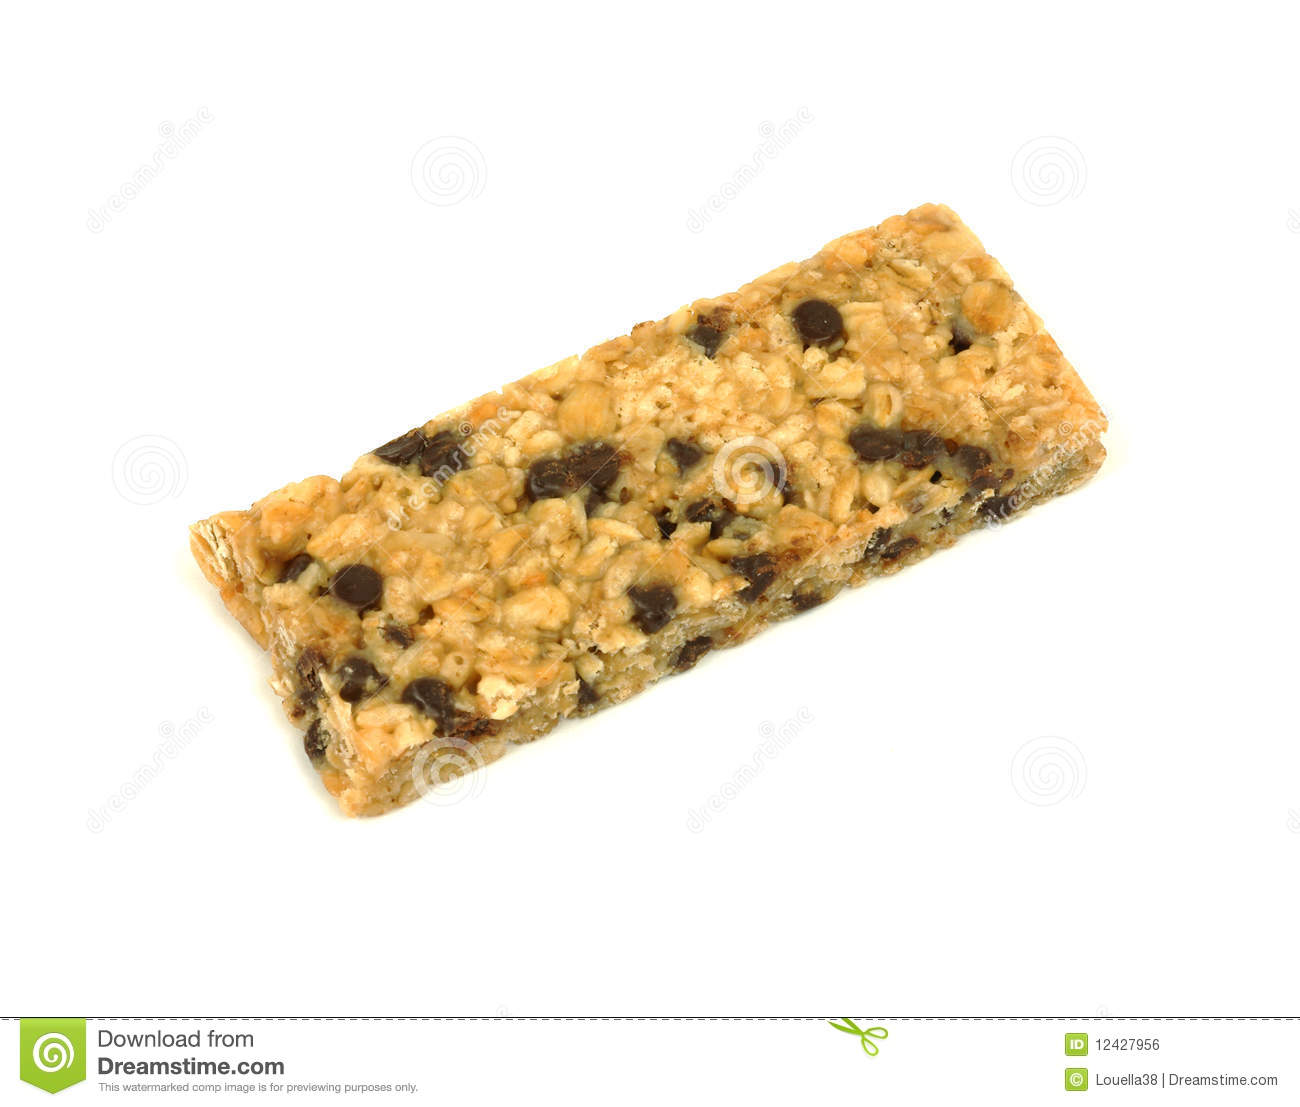 An Overhead View Of A Chewy Chocolate Chip Granola Bar